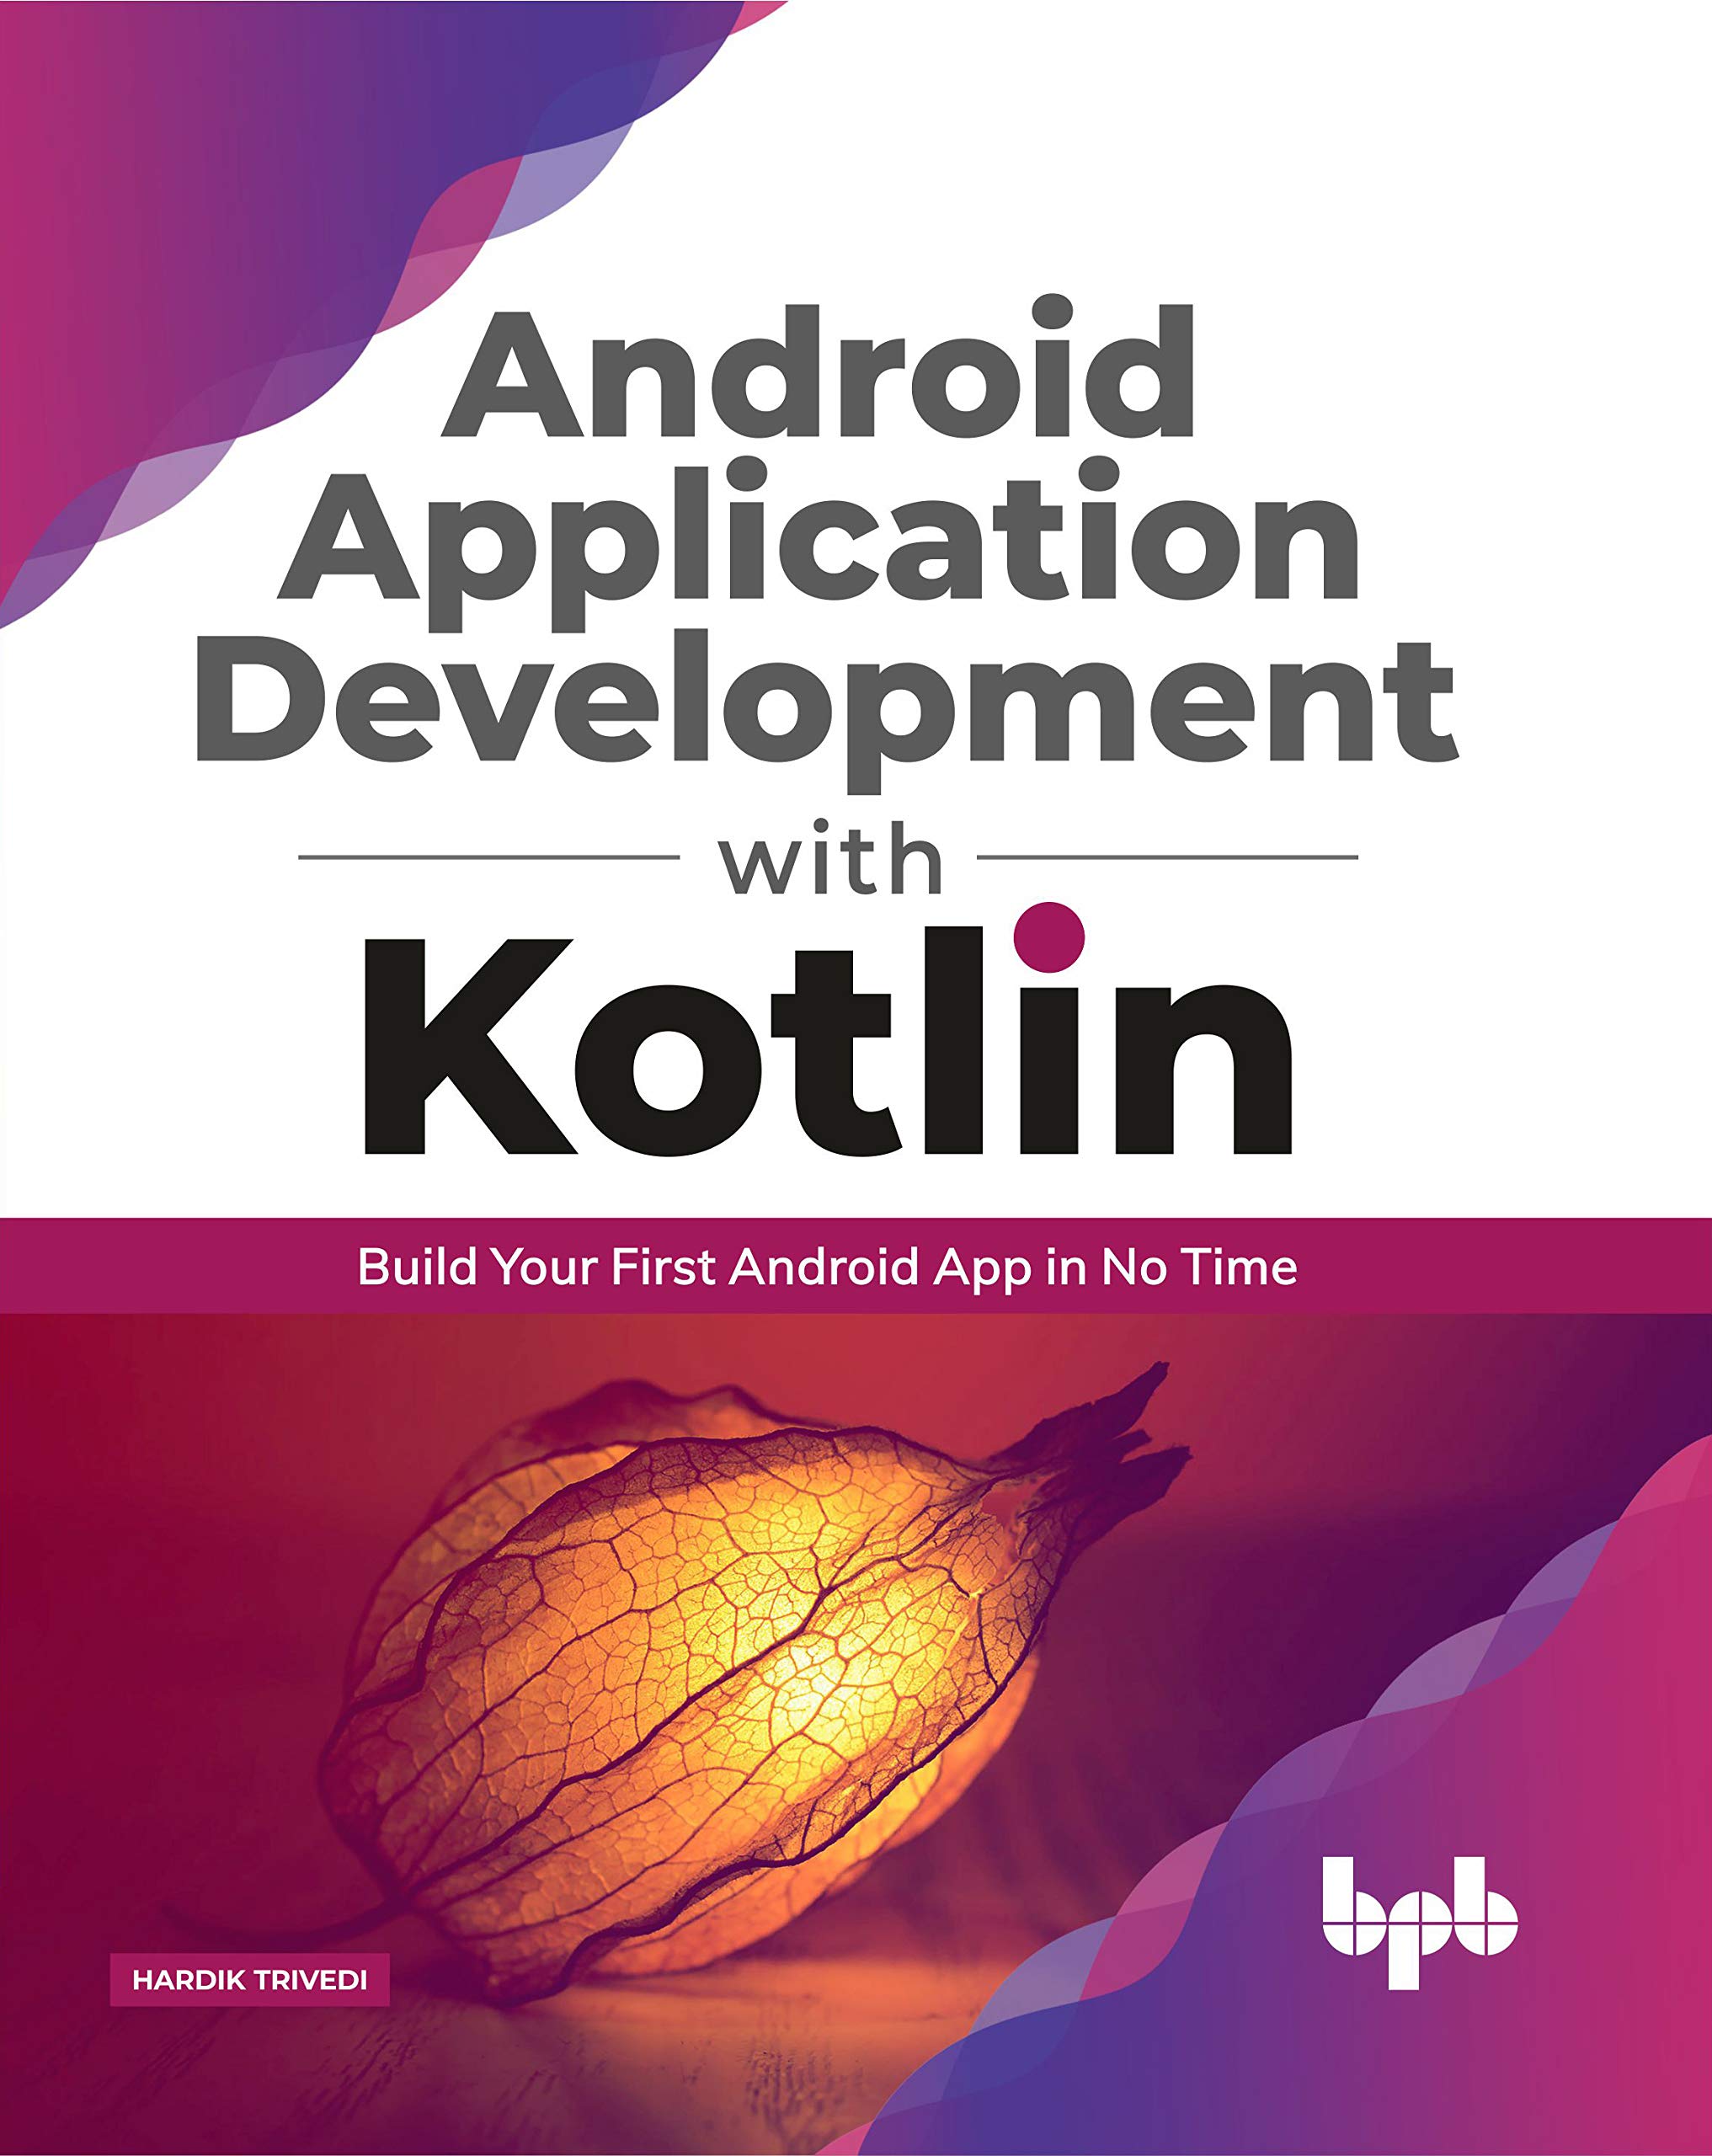 Android application development with Kotlin: Build Your First Android App In No Time by  Hardik Trivedi